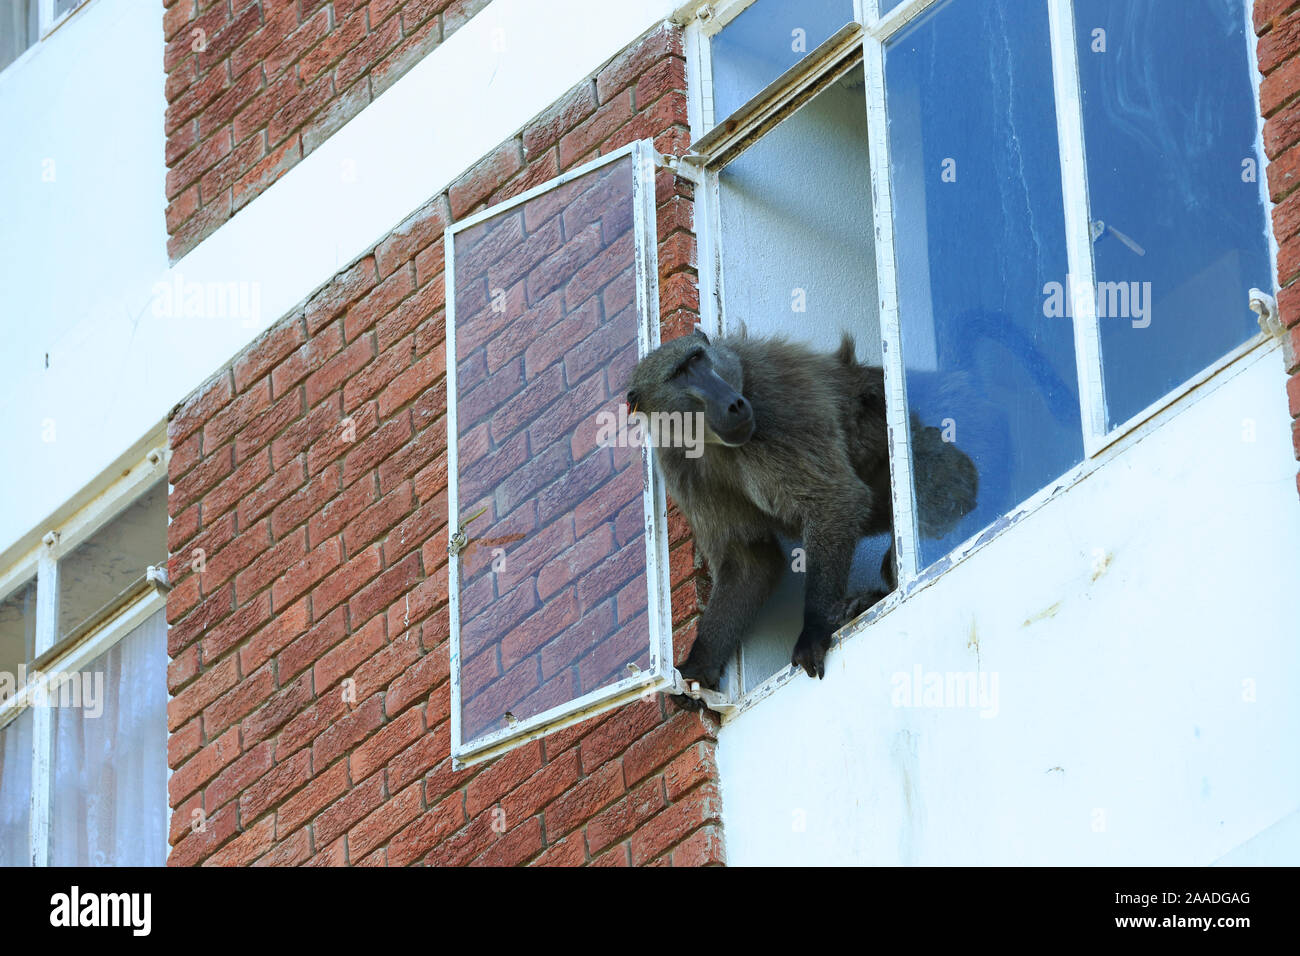 Chacma baboon (Papio ursinus) climbing into flats to steal food, Cape Peninsula, South Africa Stock Photo